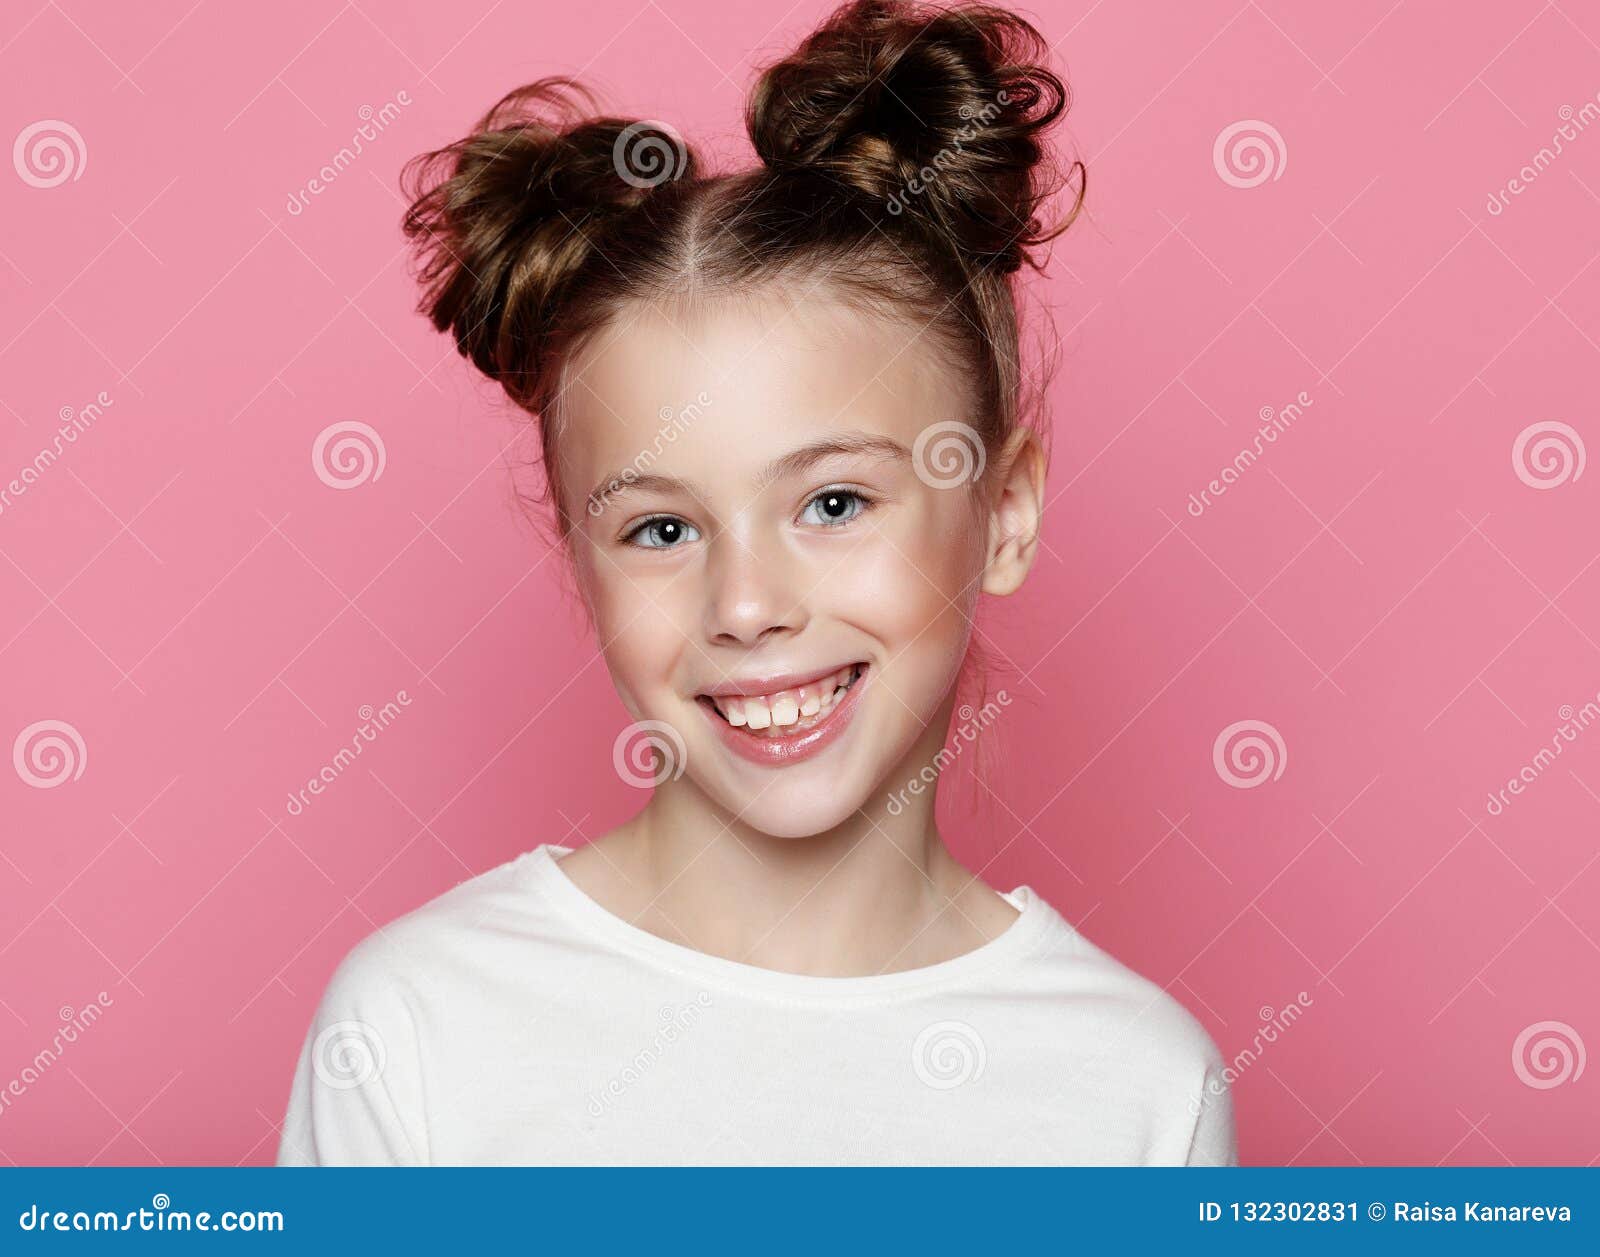 Cute Girl 7-8 Year Old Posing In Studio Over Pink Background Stock